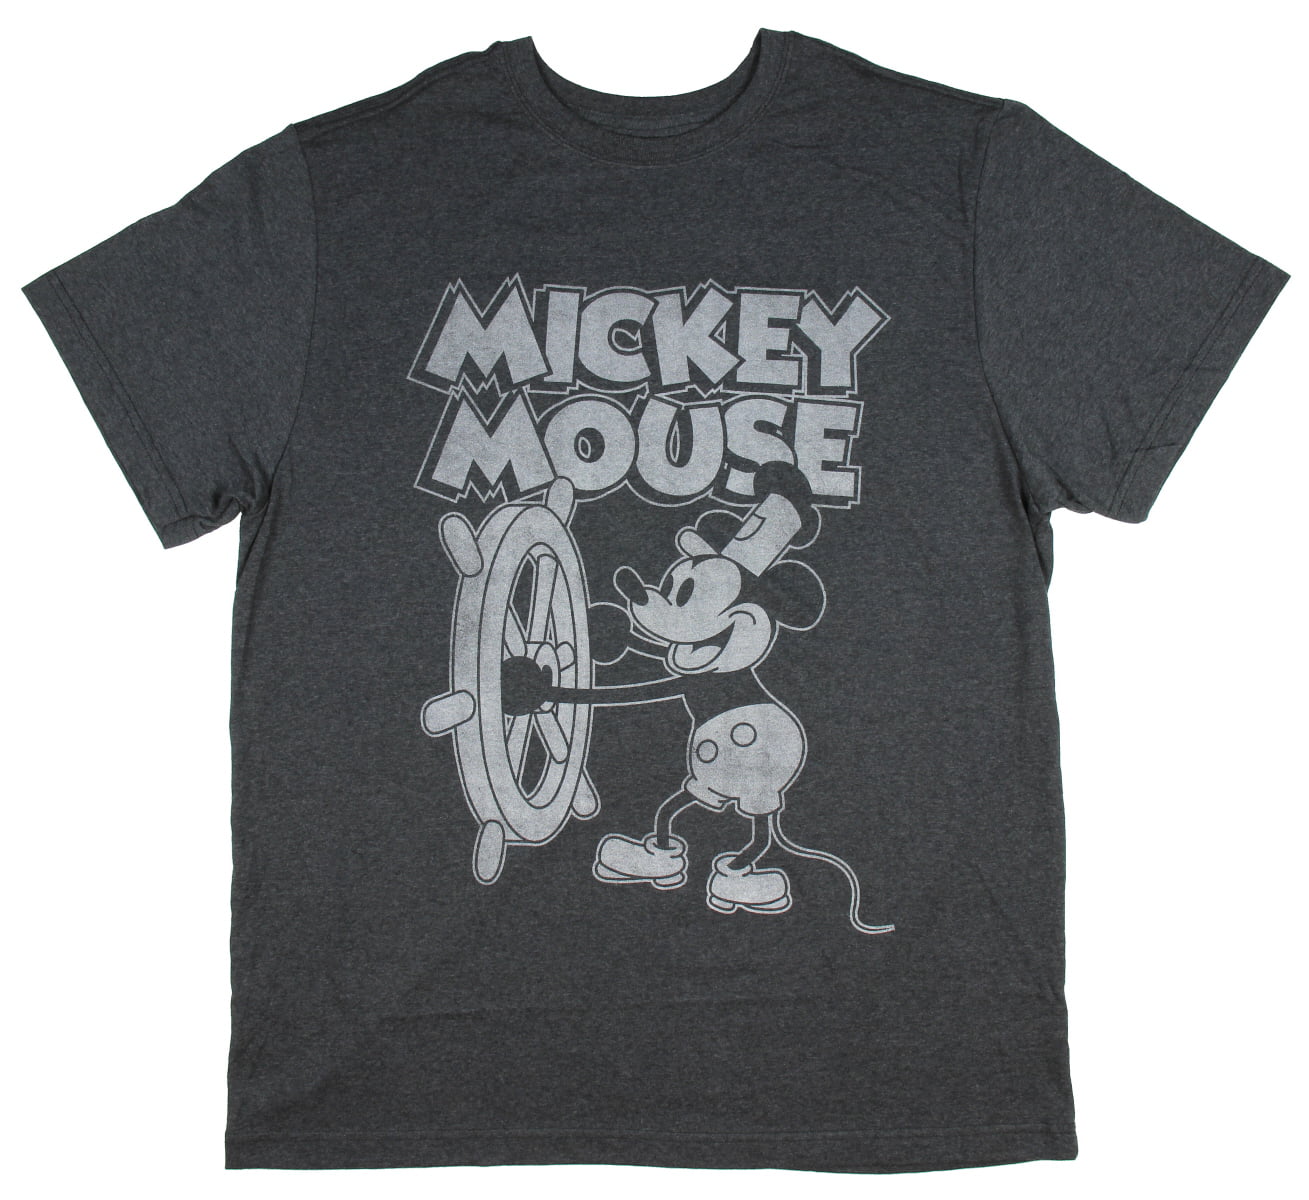 Disney Disney Mickey Mouse T Shirt Steamboat Willie Big